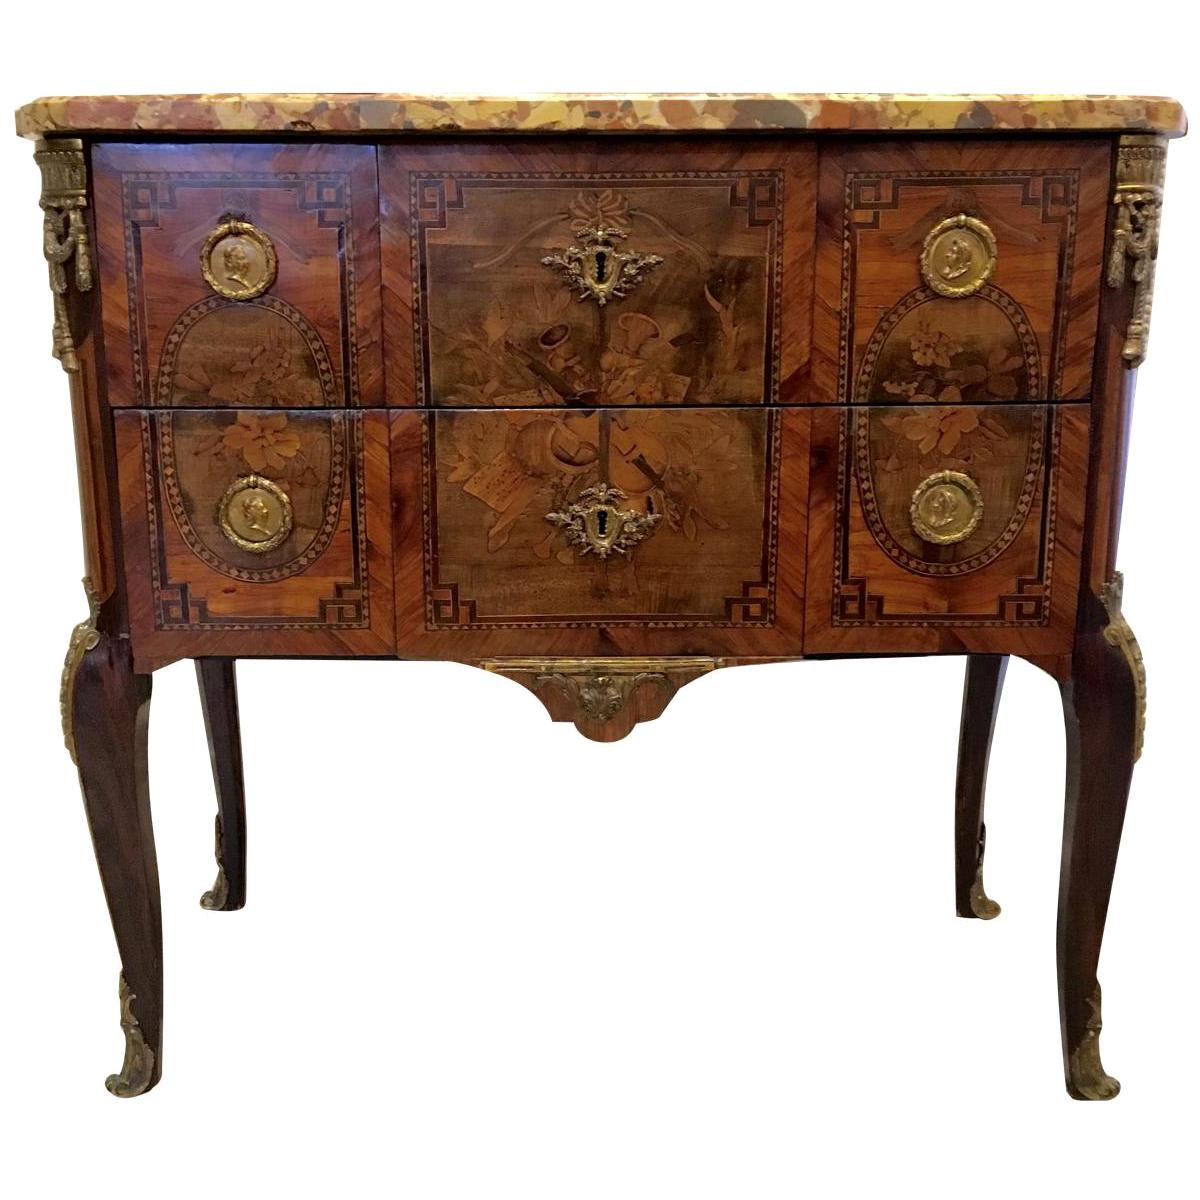 Louis XVI Two-Drawer Commode Signed Francois Rubestuck, circa 1765